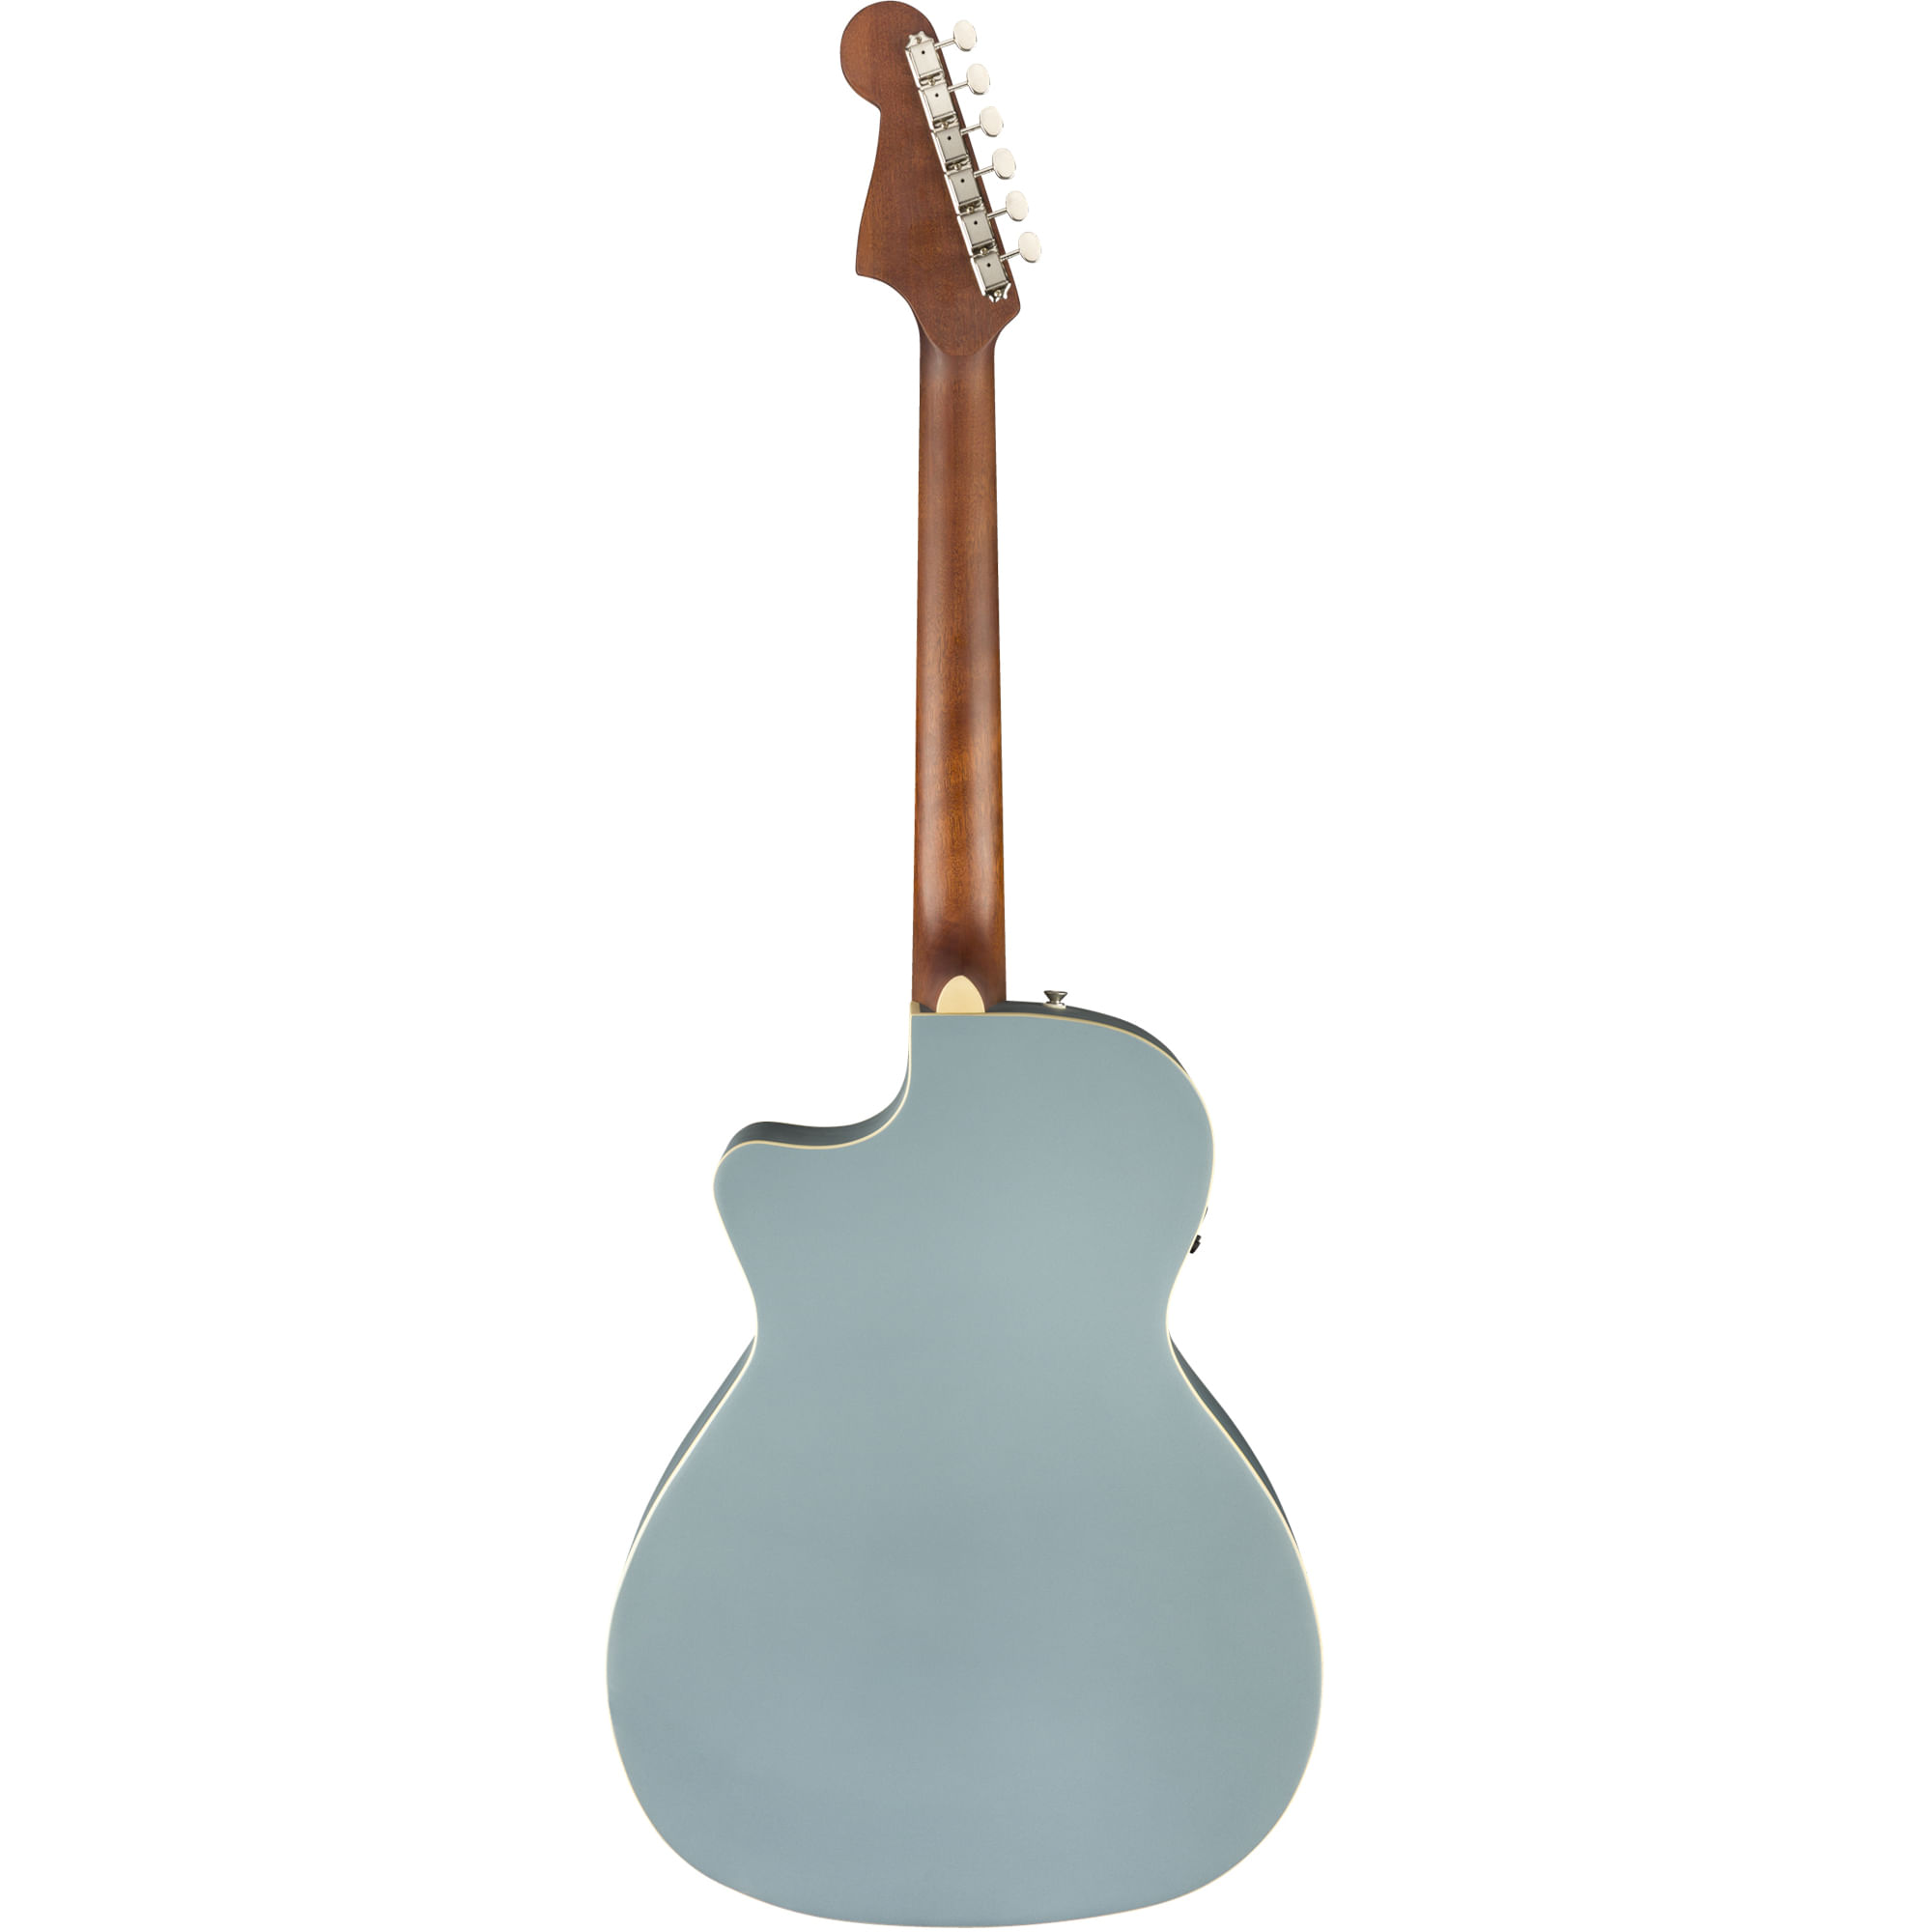 Fender Newporter Player Acoustic-Electric Guitar - Walnut, Ice Blue Satin -  Cosmo Music | Canada's #1 Music Store - Shop, Rent, Repair